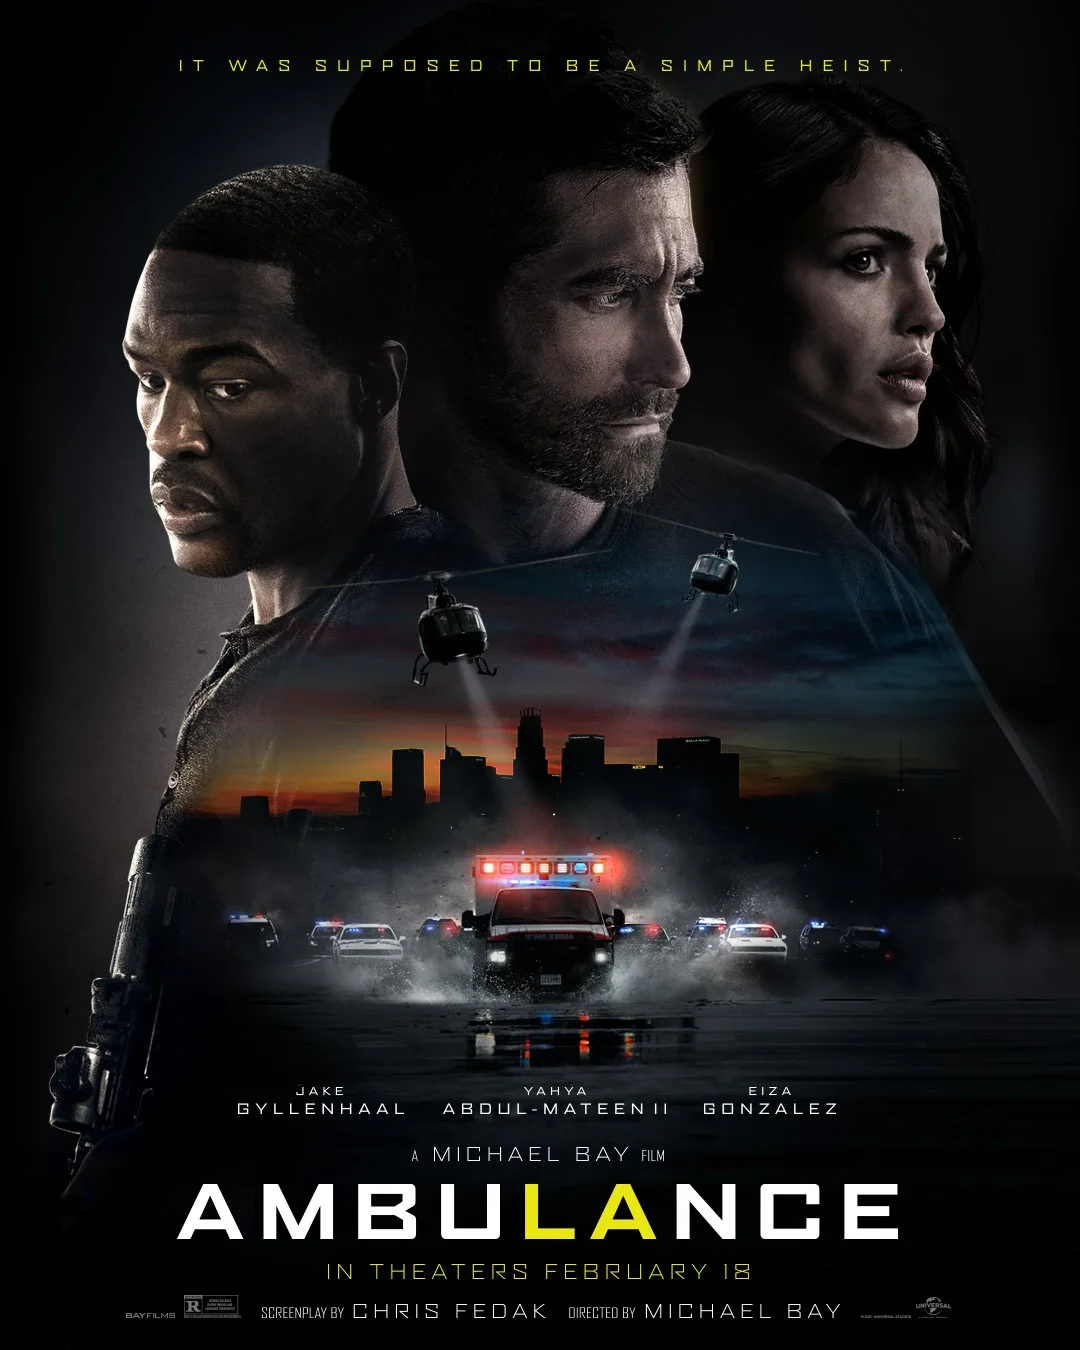 "Ambulance" exposed behind-the-scenes special, the stars praise Michael Bay